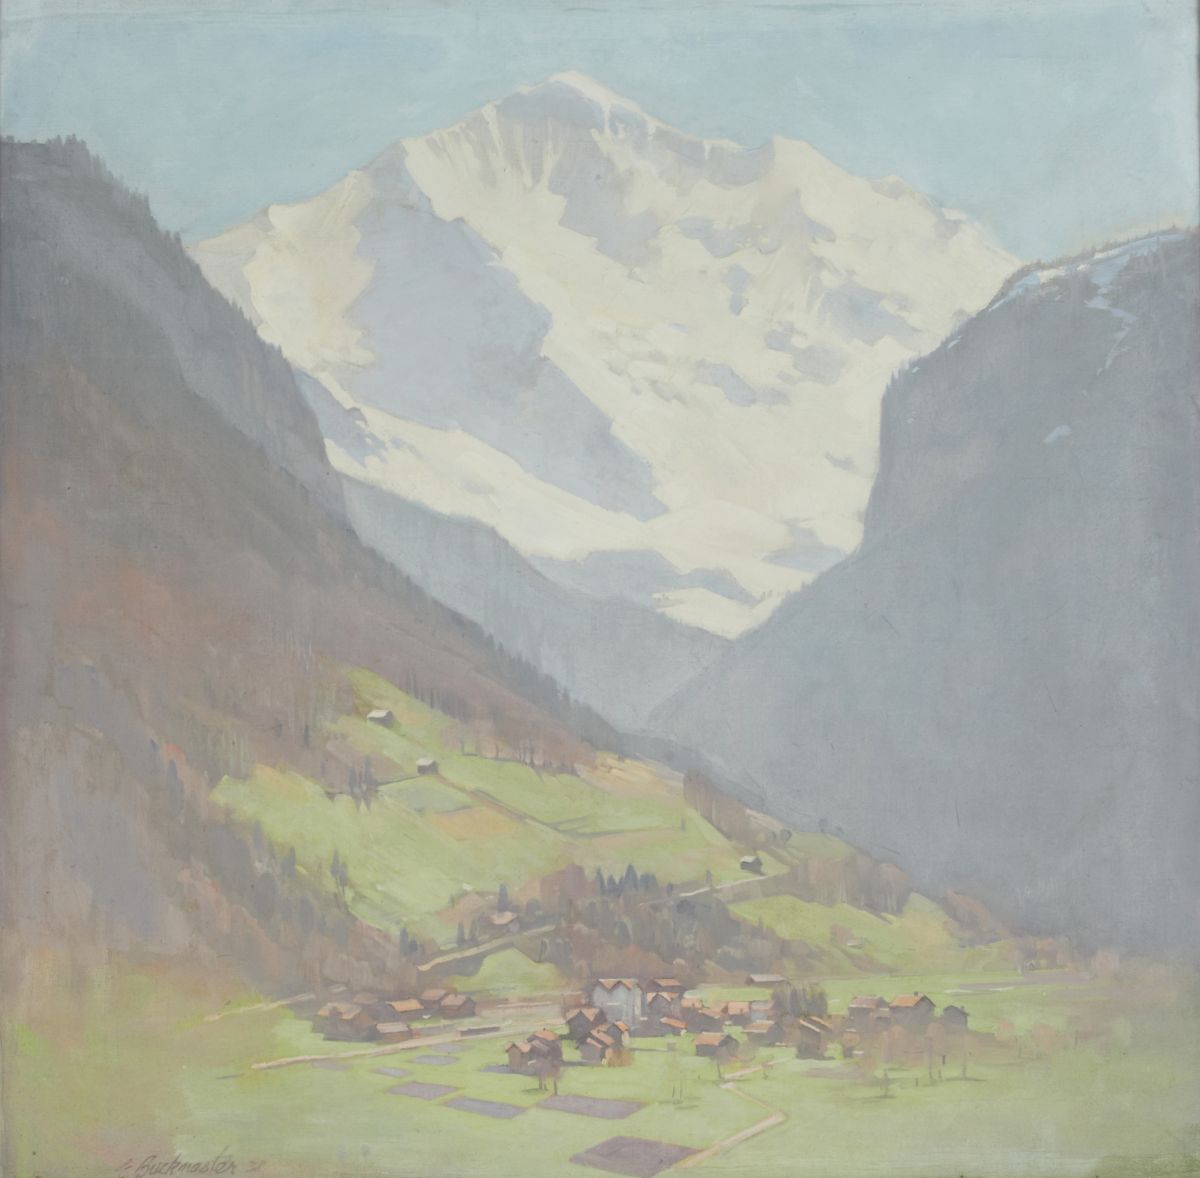 Village in the Snow clad Mountains, 1938